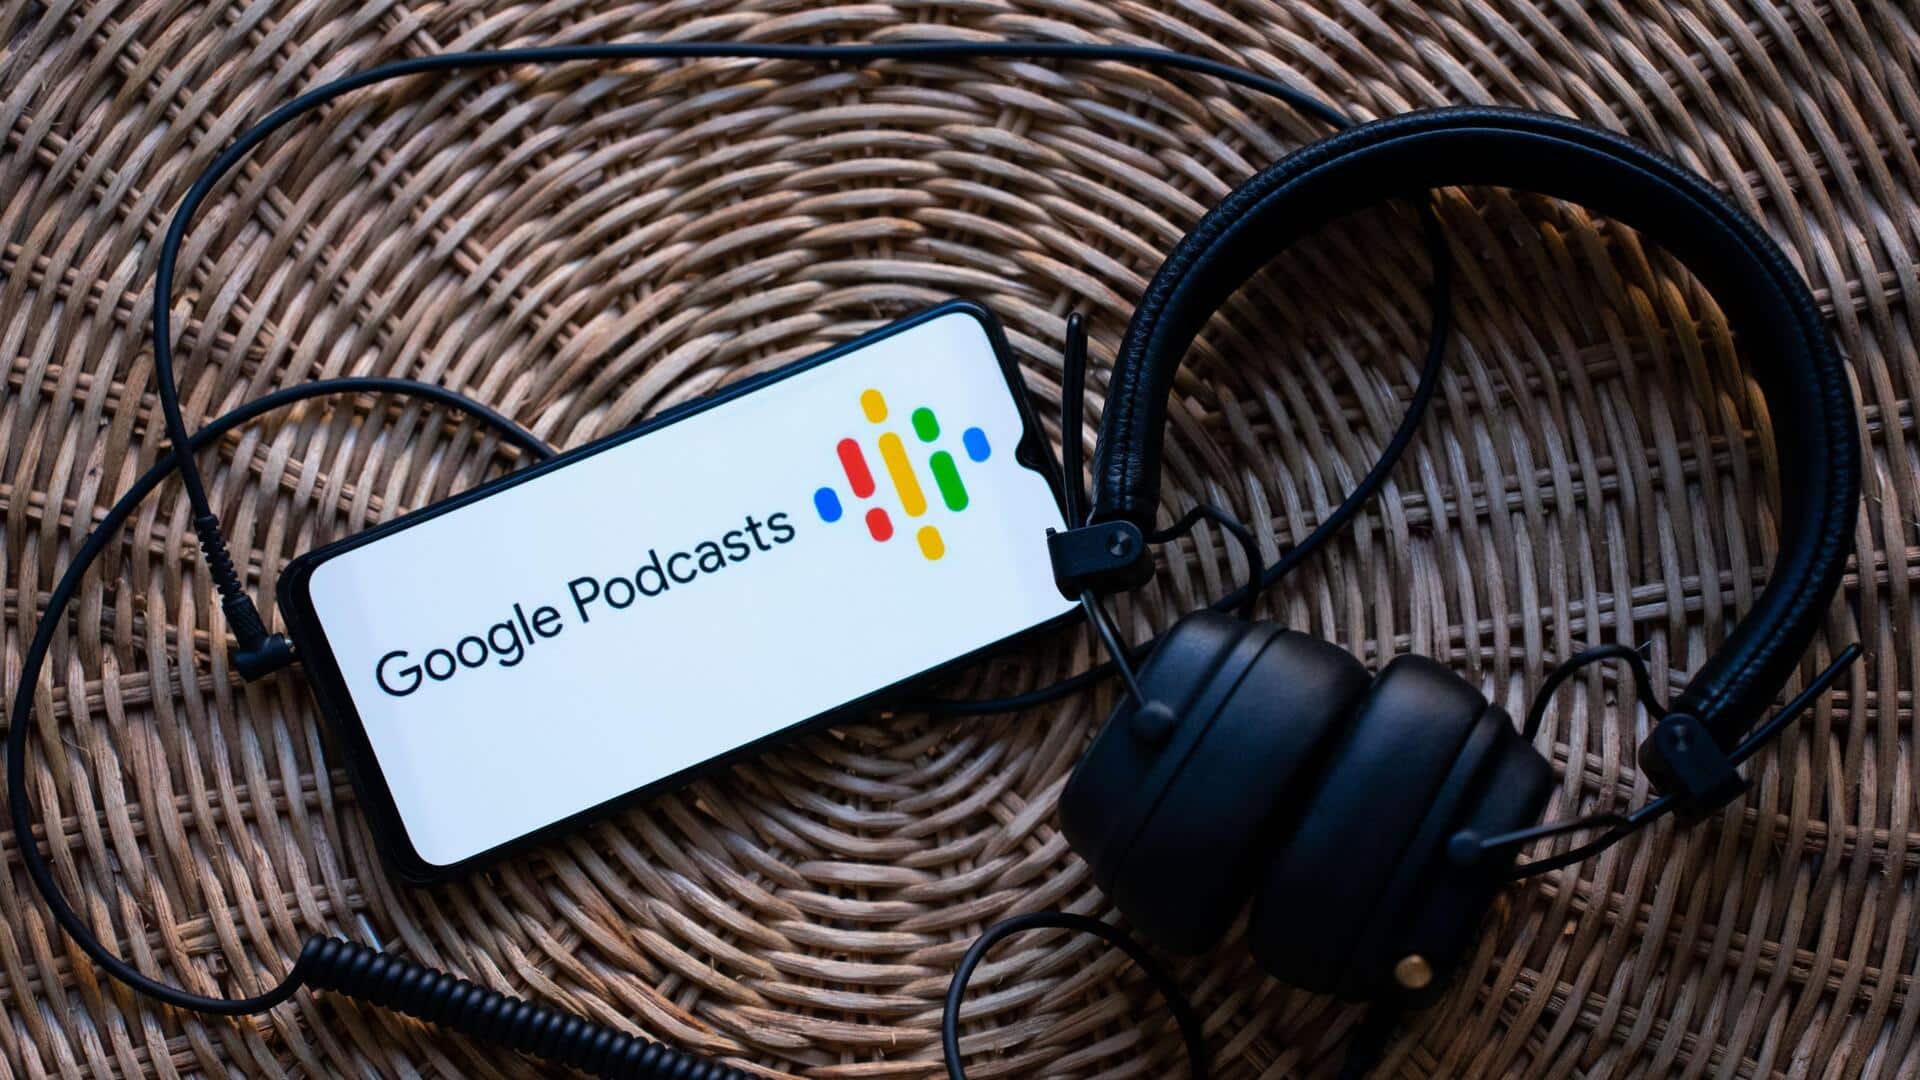 Google Podcasts to stop working from April 2: Know solution